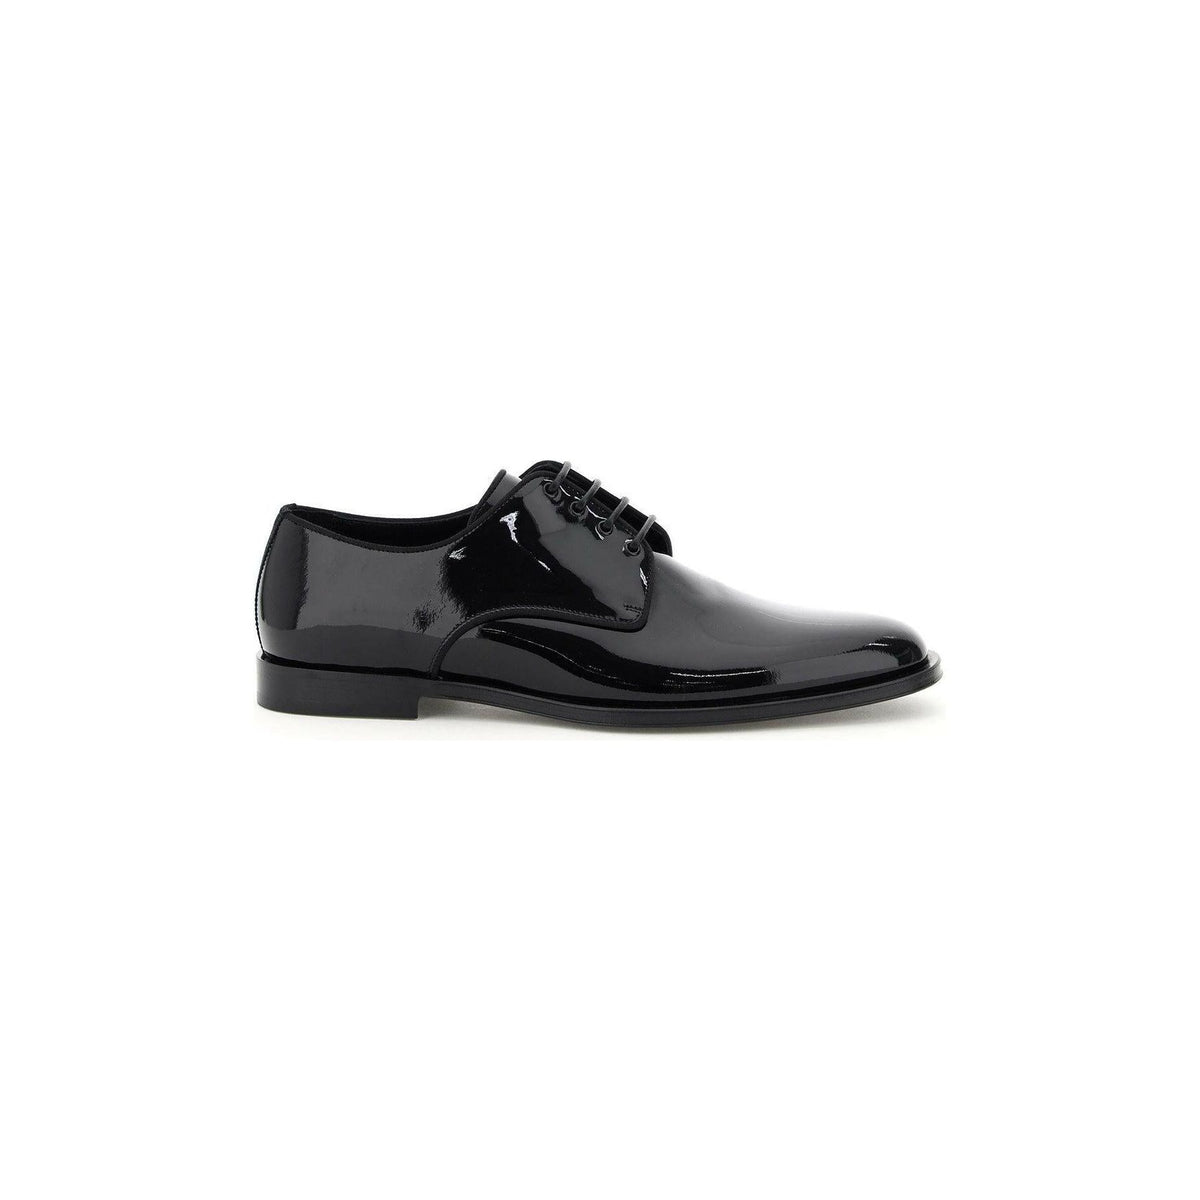 Black Patent Leather Lace Up Derby Shoes With Grosgrain Hems DOLCE & GABBANA JOHN JULIA.